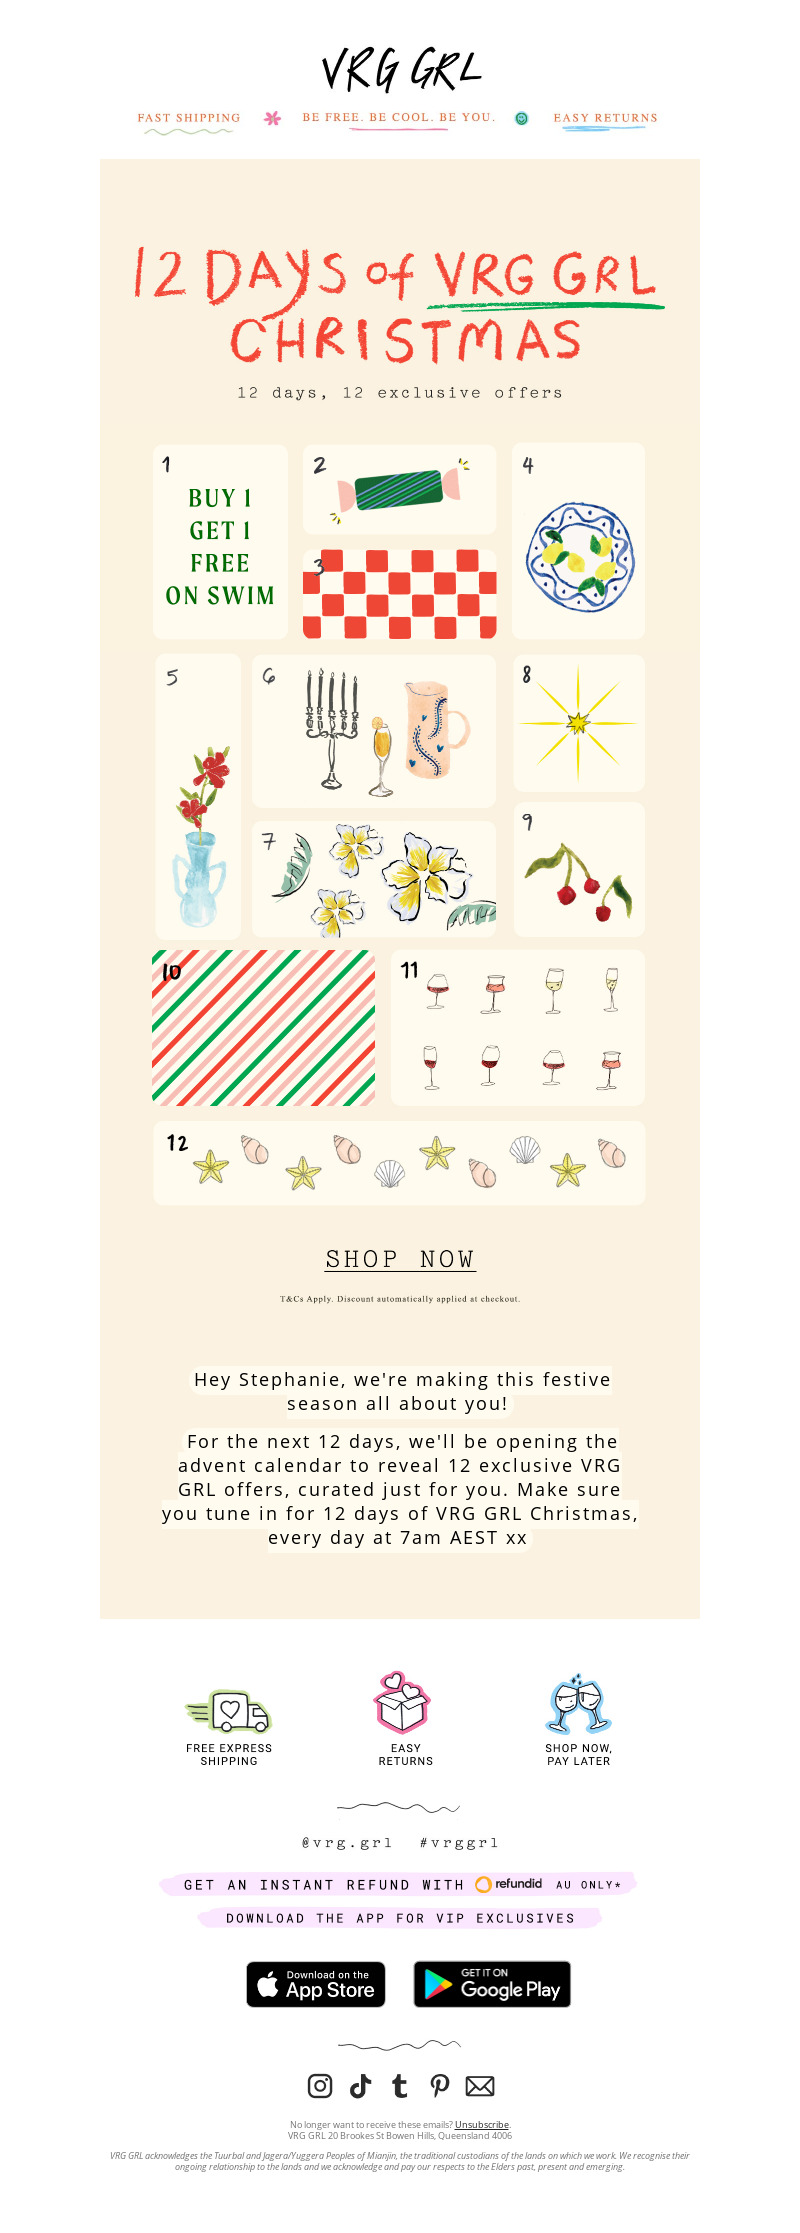 12 days of VRG GRL Christmas holiday marketing campaigns email.